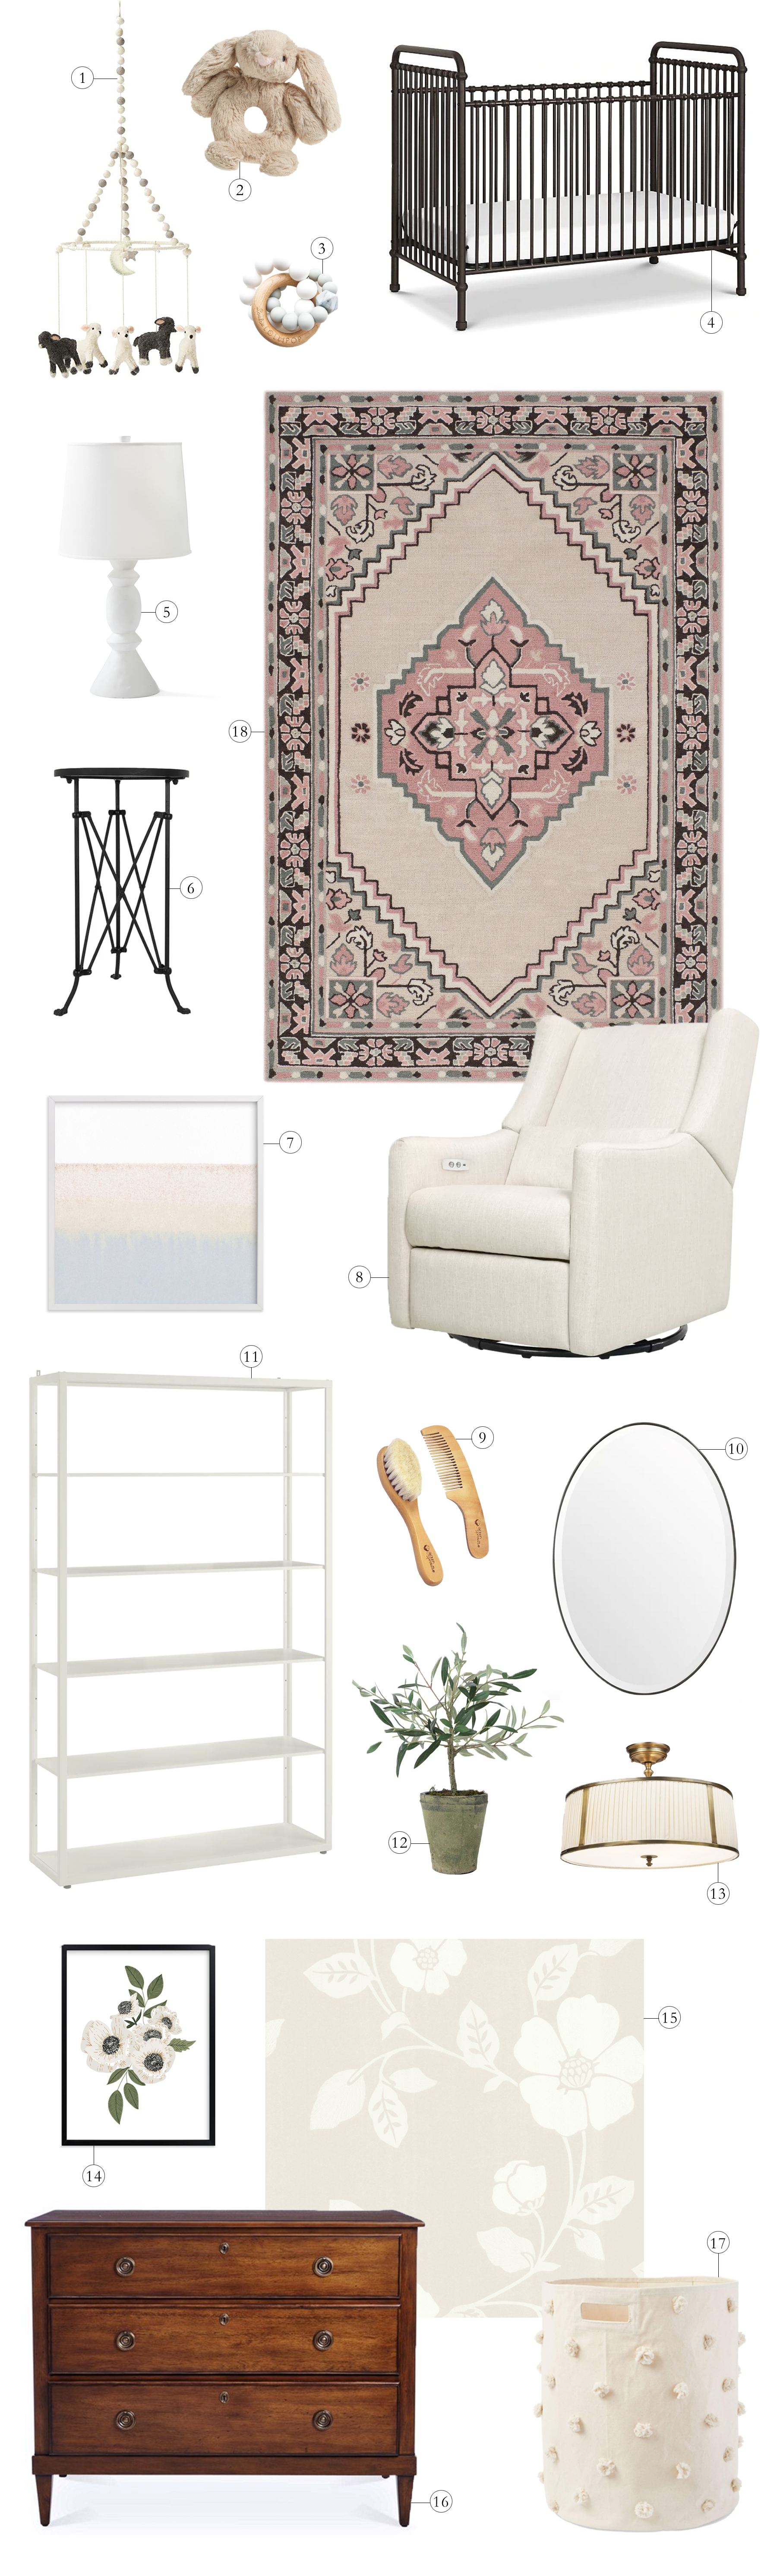 Ivy’s “Father of the Bride” Inspired Nursery Plan